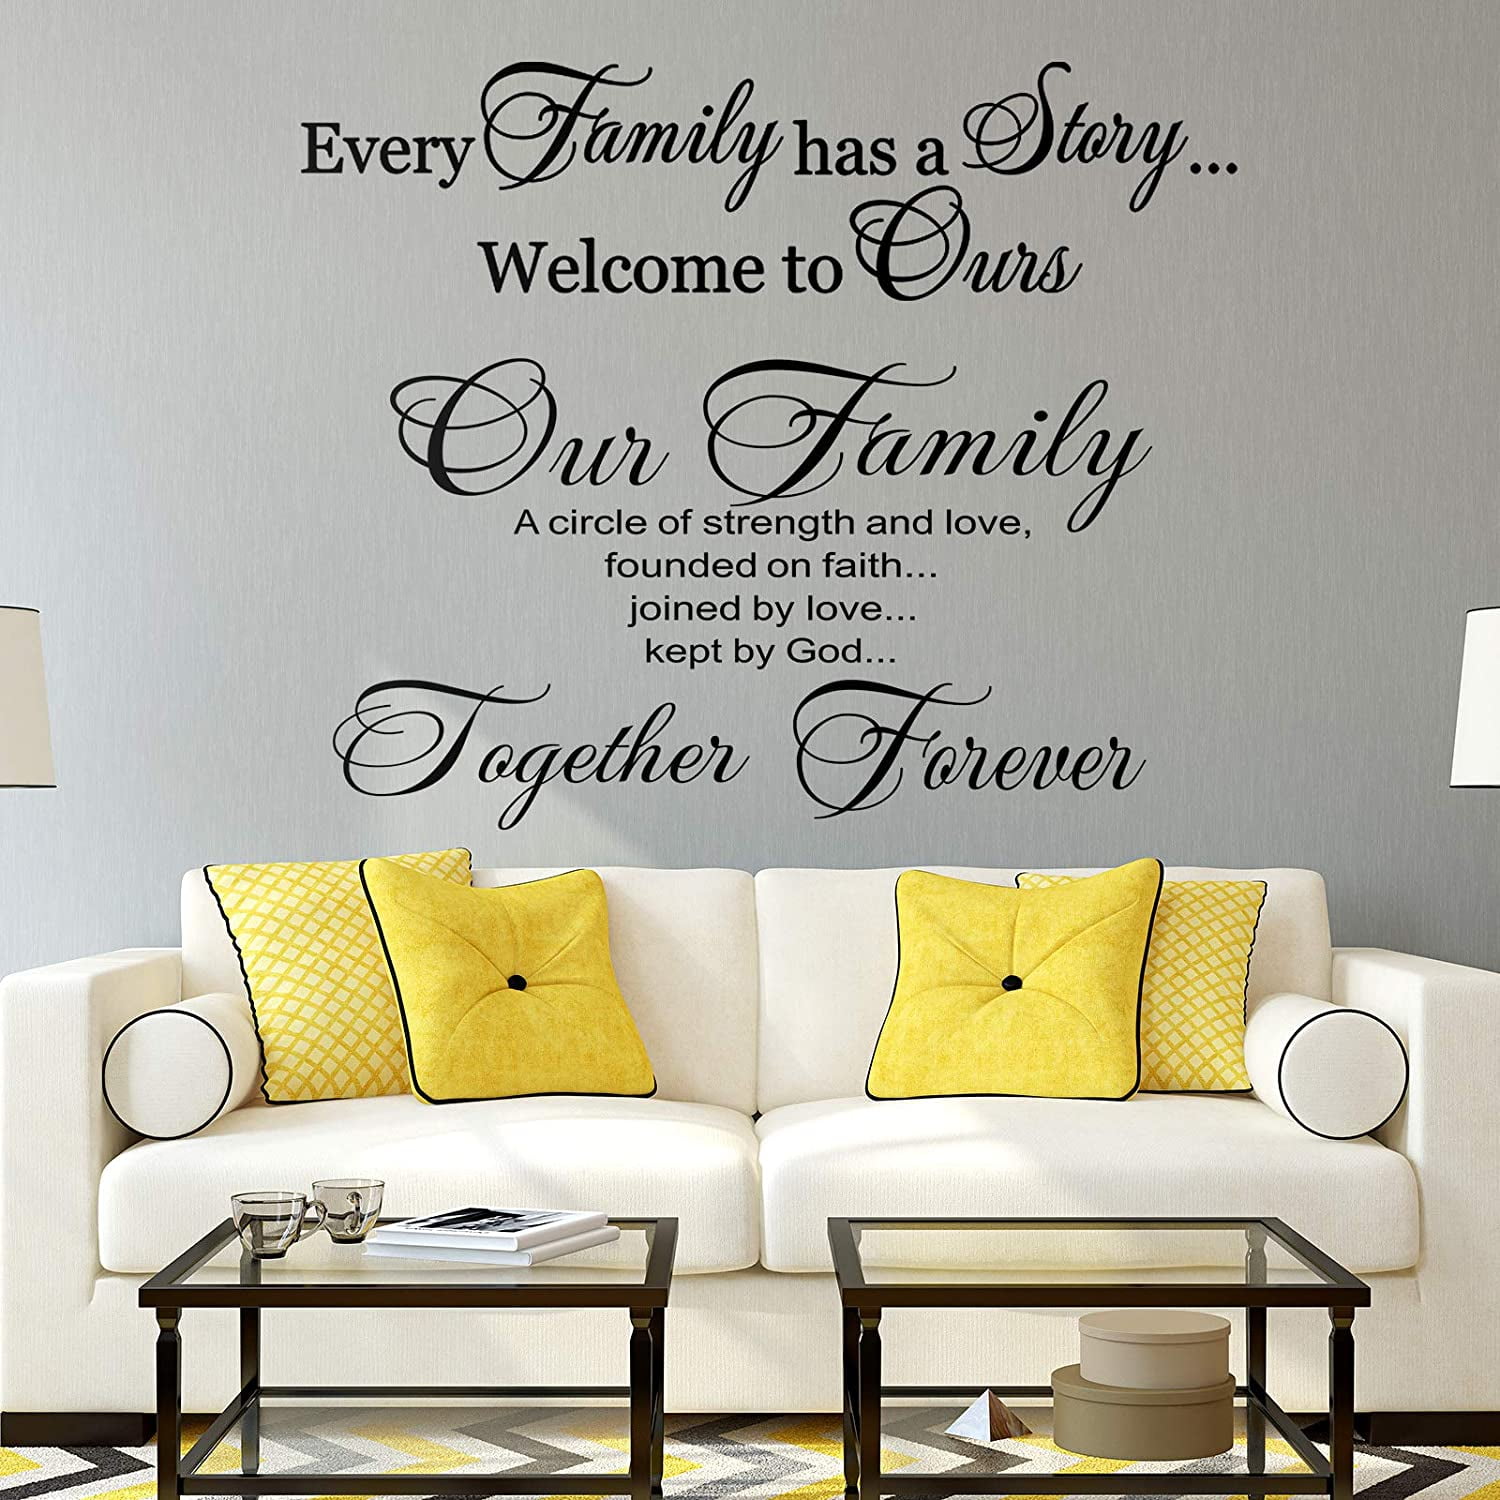 2 Pieces Vinyl Wall Quotes Stickers Family Lettering Wall Decals Scripture Wall Decal Bible Verse Vinyl Stickers Our Family Is A Circle Inspirational Stickers For Living Bedroom Home Decorations | Walmart Canada